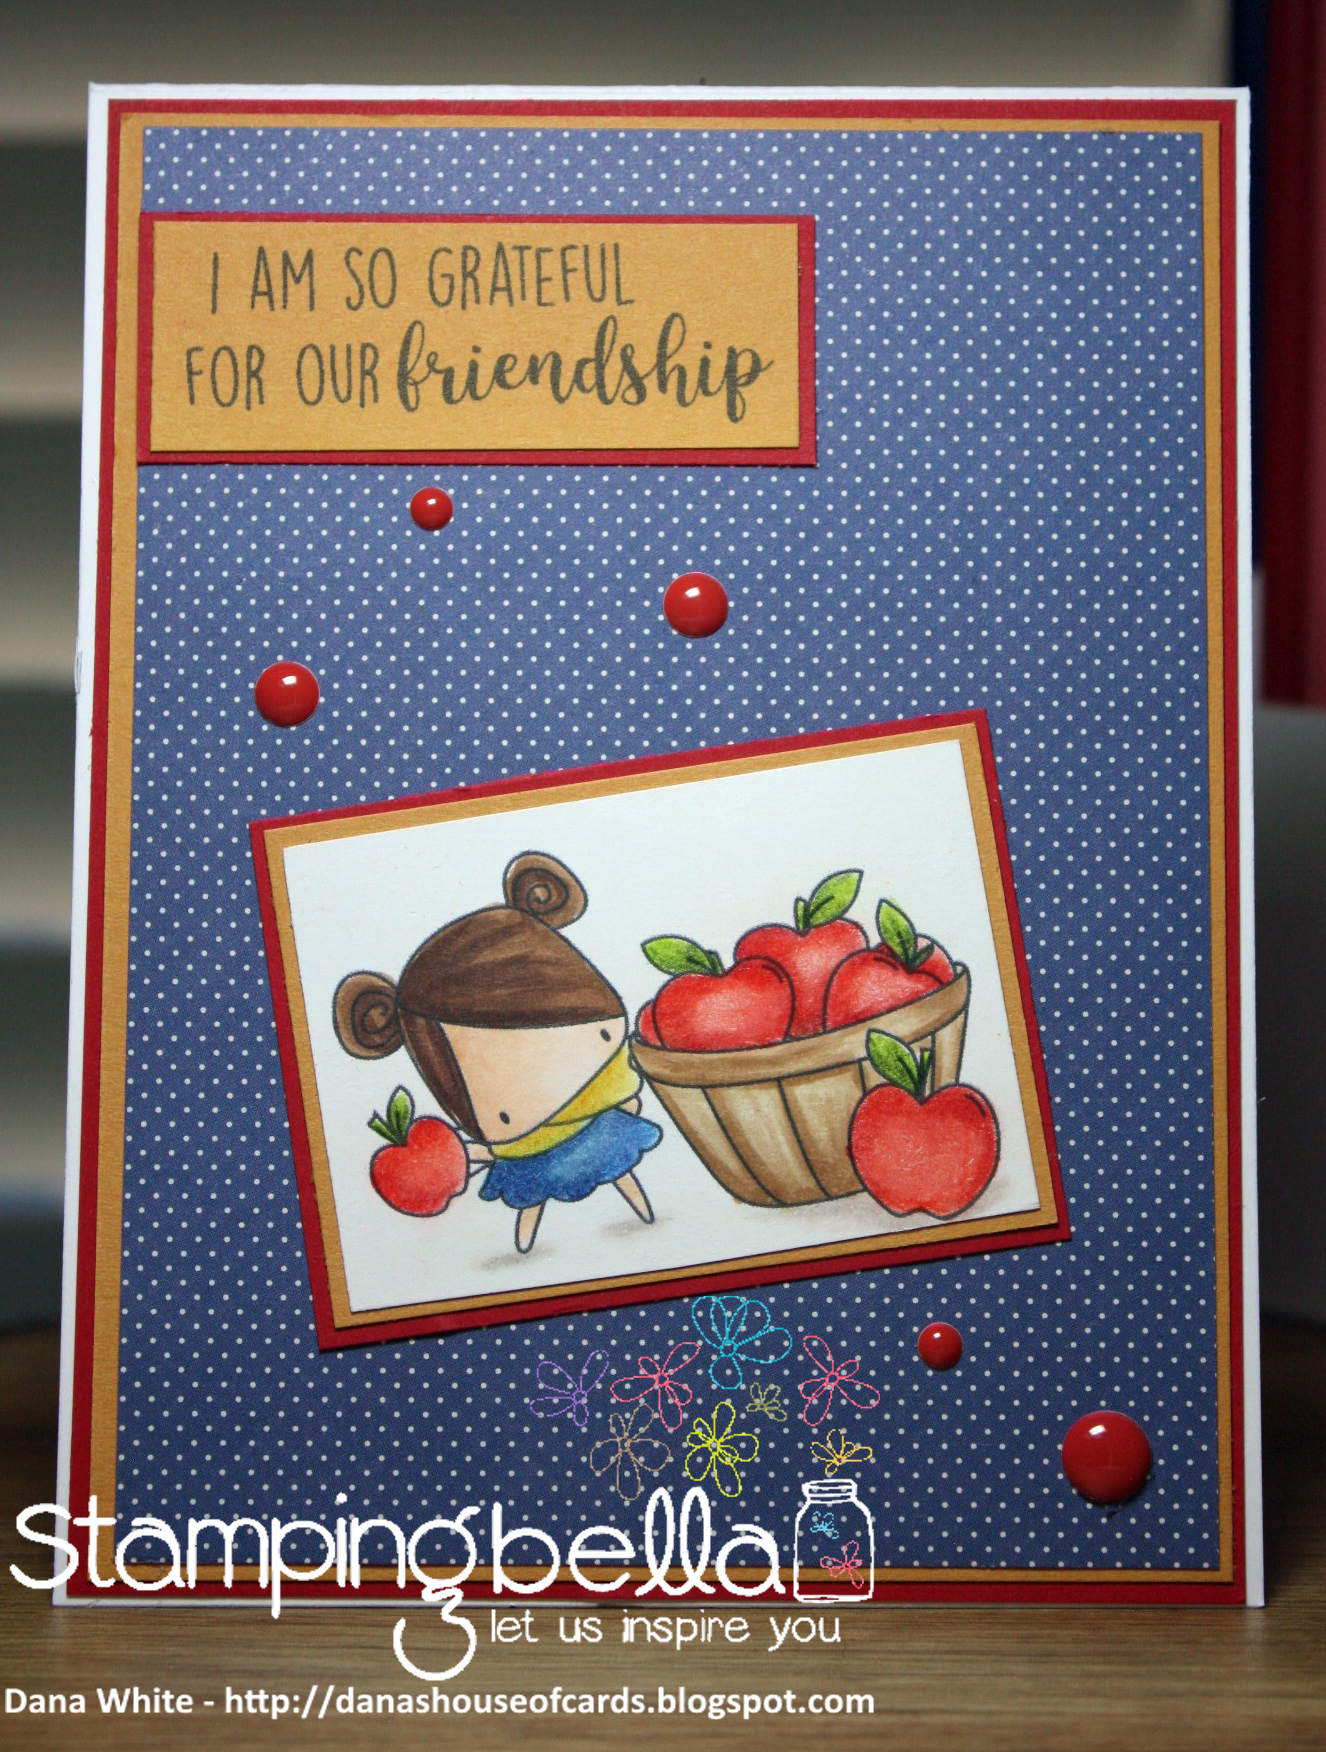 Stamping Bella SNEAK PEEK DAY 1- STAMPS USED: FALL SENTIMENT SET, THE LITTLES-APPLE PICKING image.. Card by Dana White